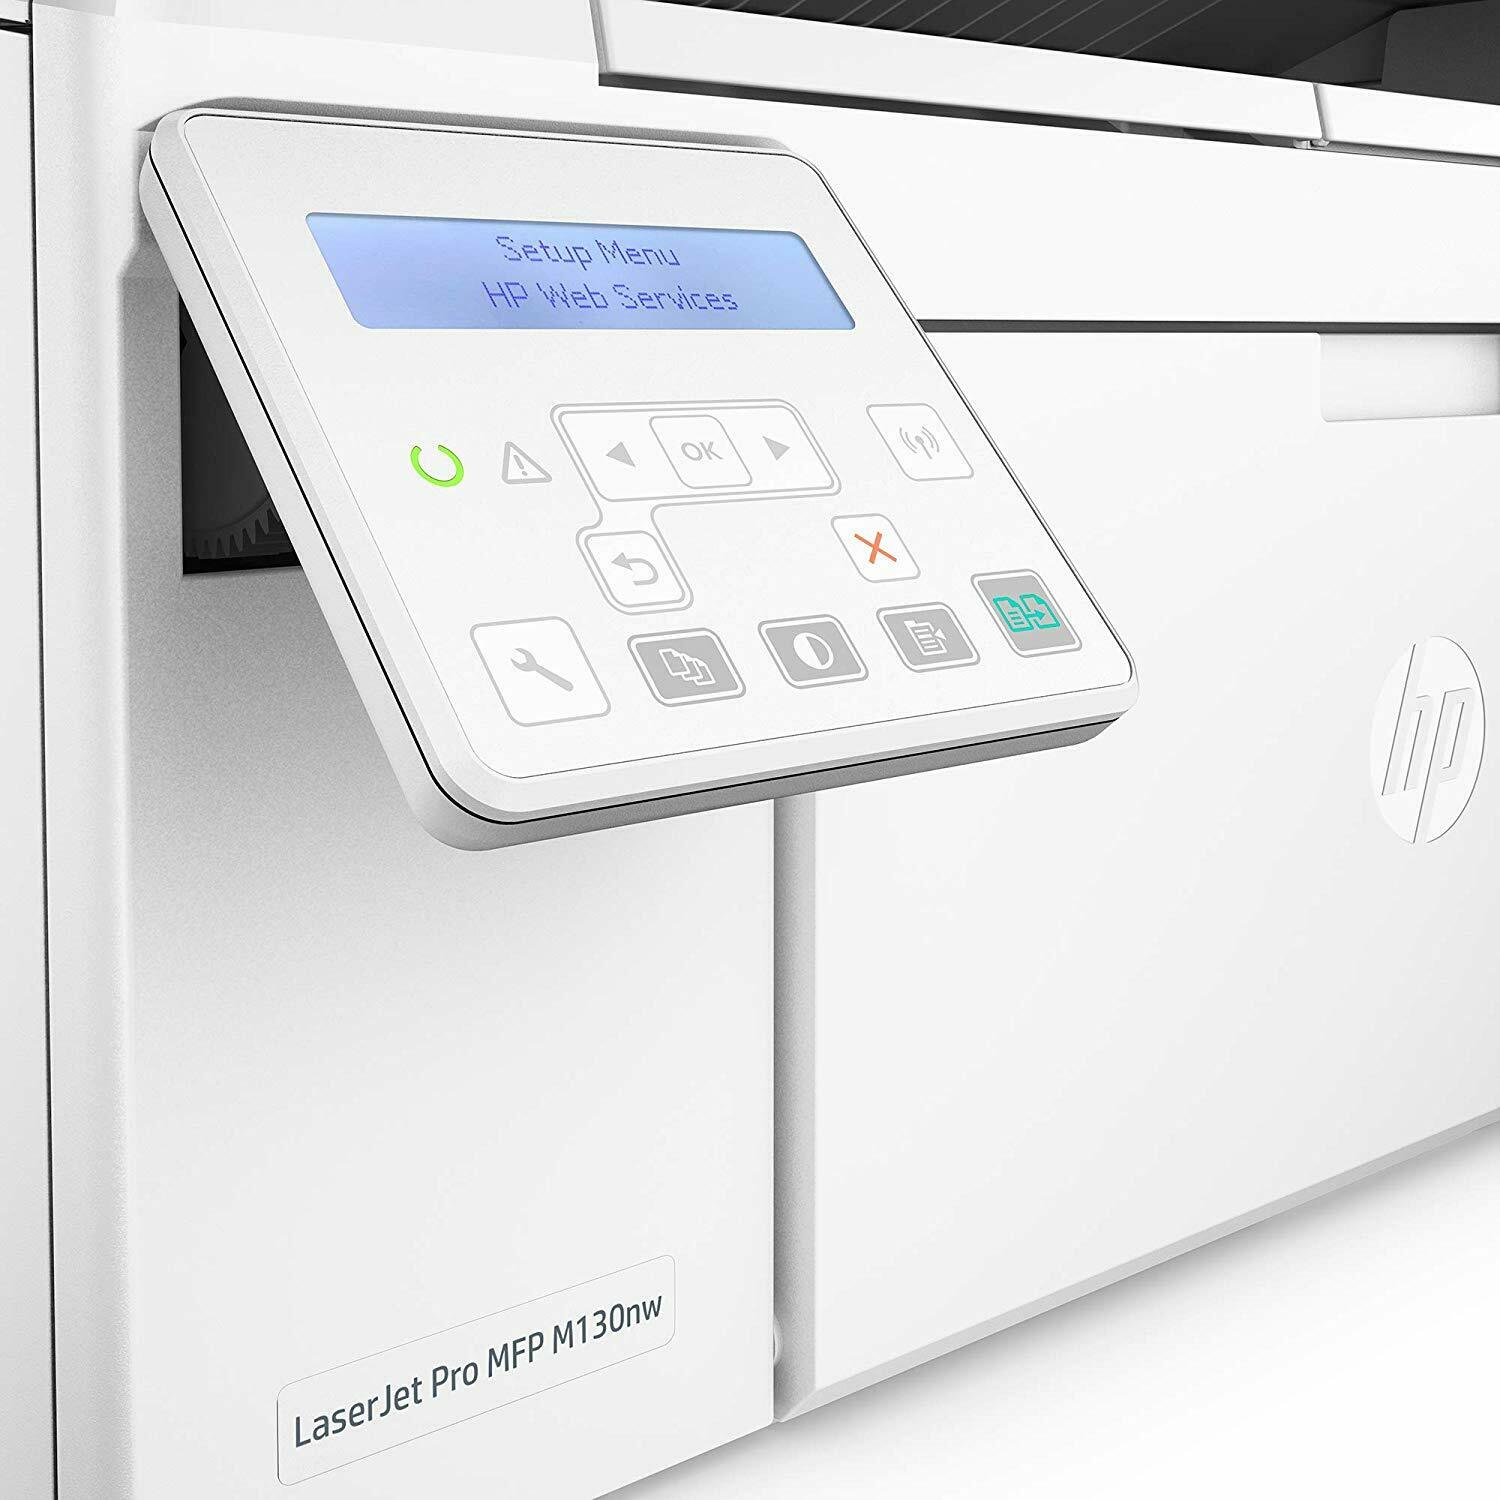 HP LaserJet Pro MFP M130nw Wireless Black & White All-In-One Printer - image 3 of 9